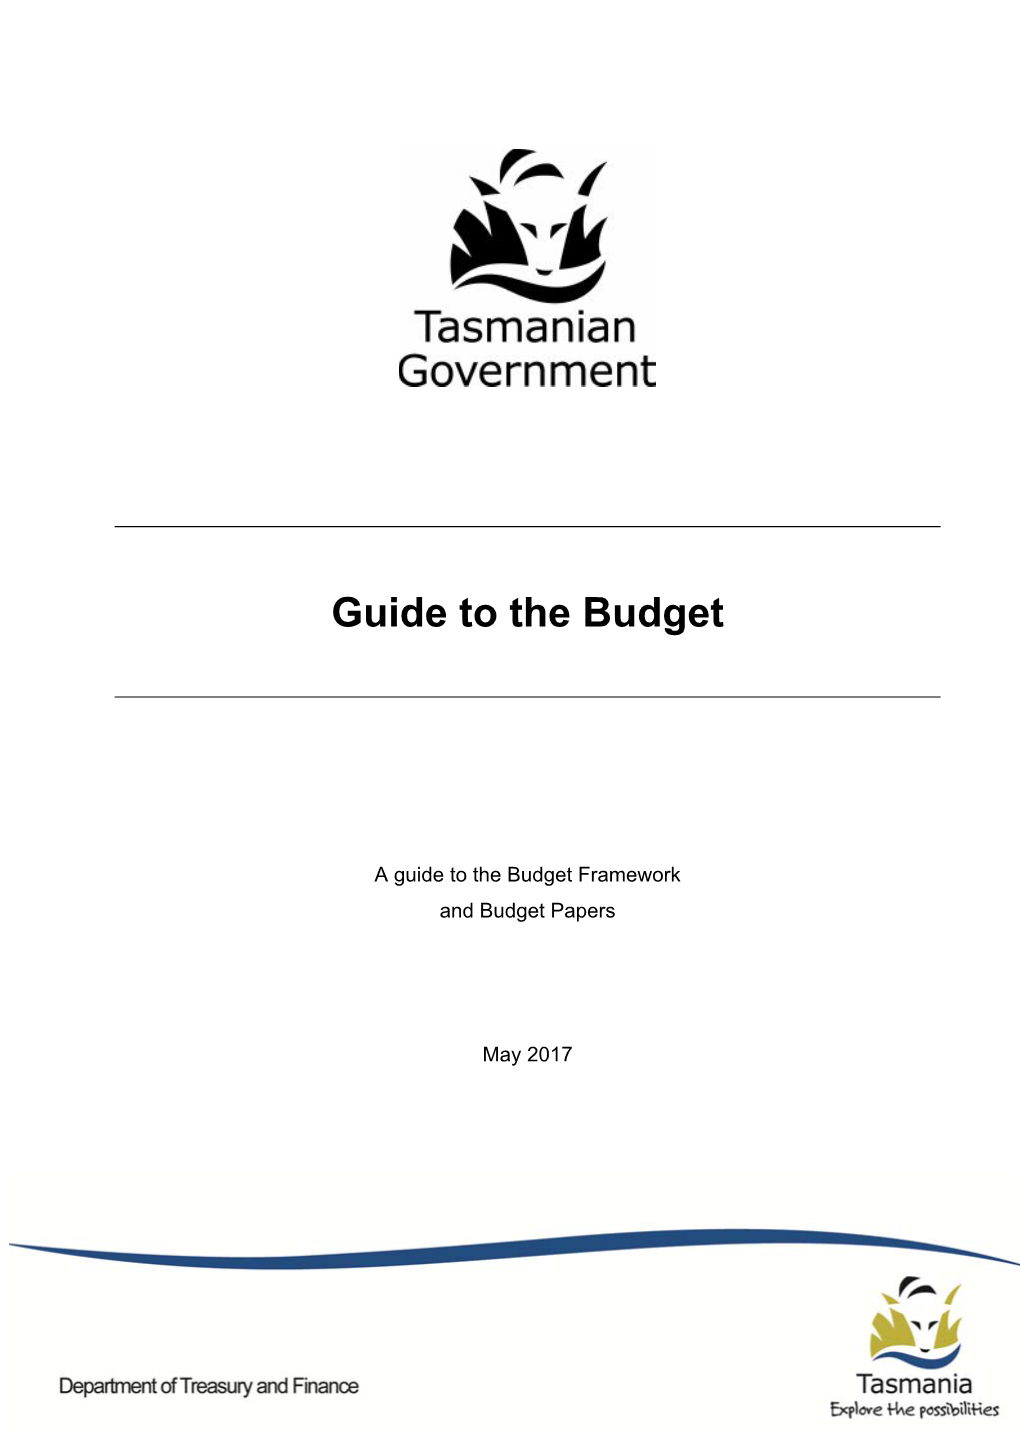 Guide to the Budget